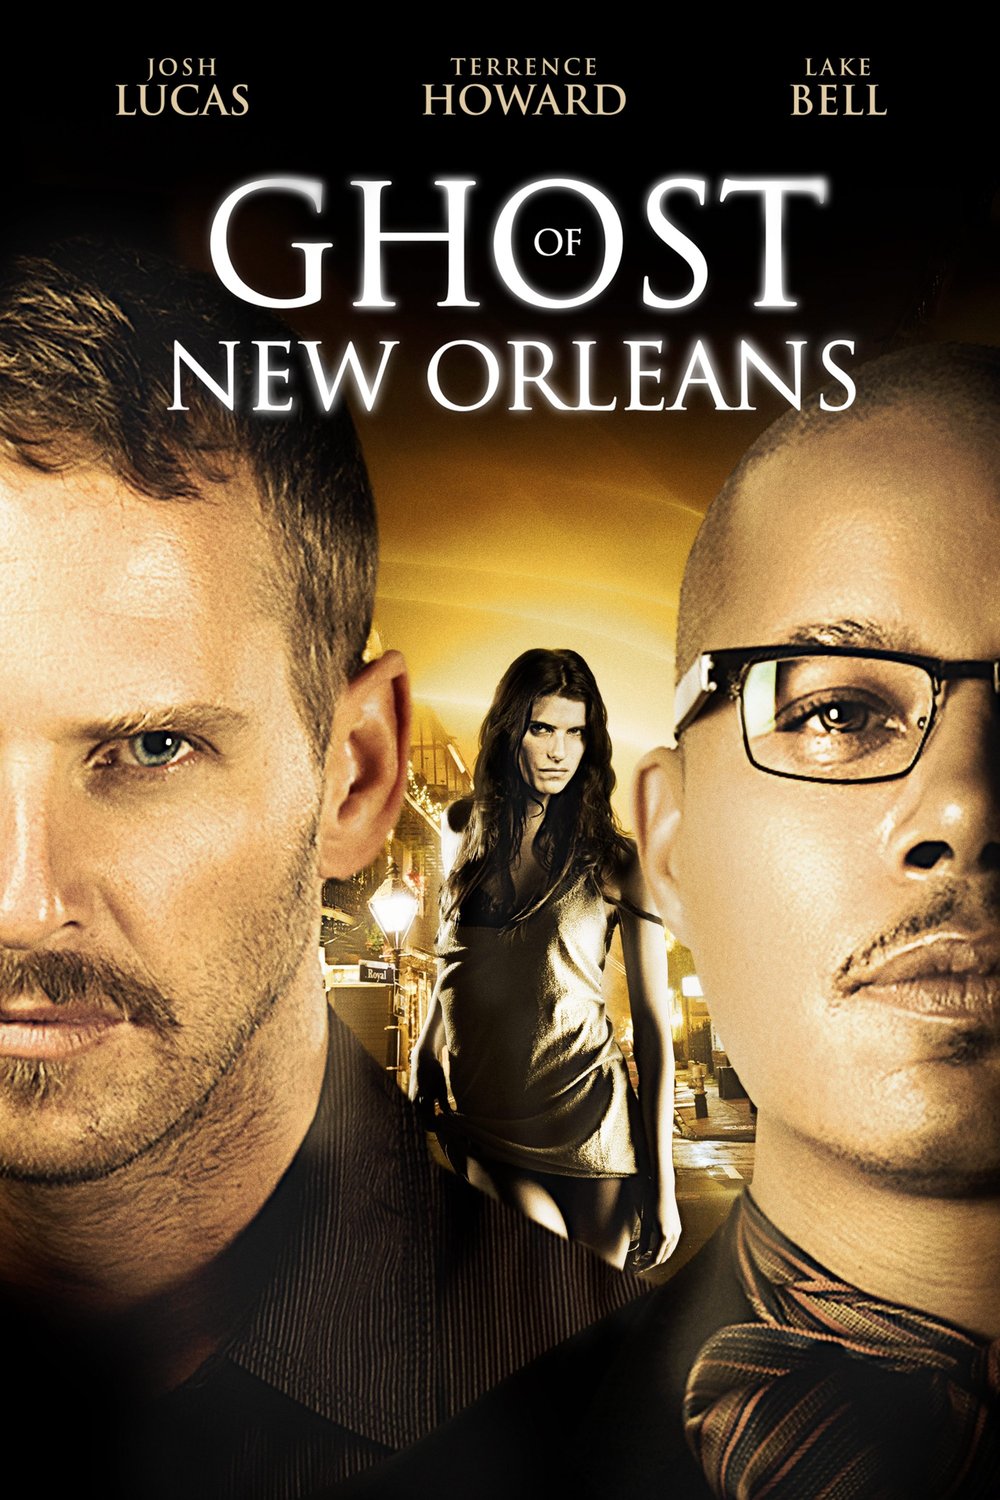 Poster of the movie Ghost of New Orleans